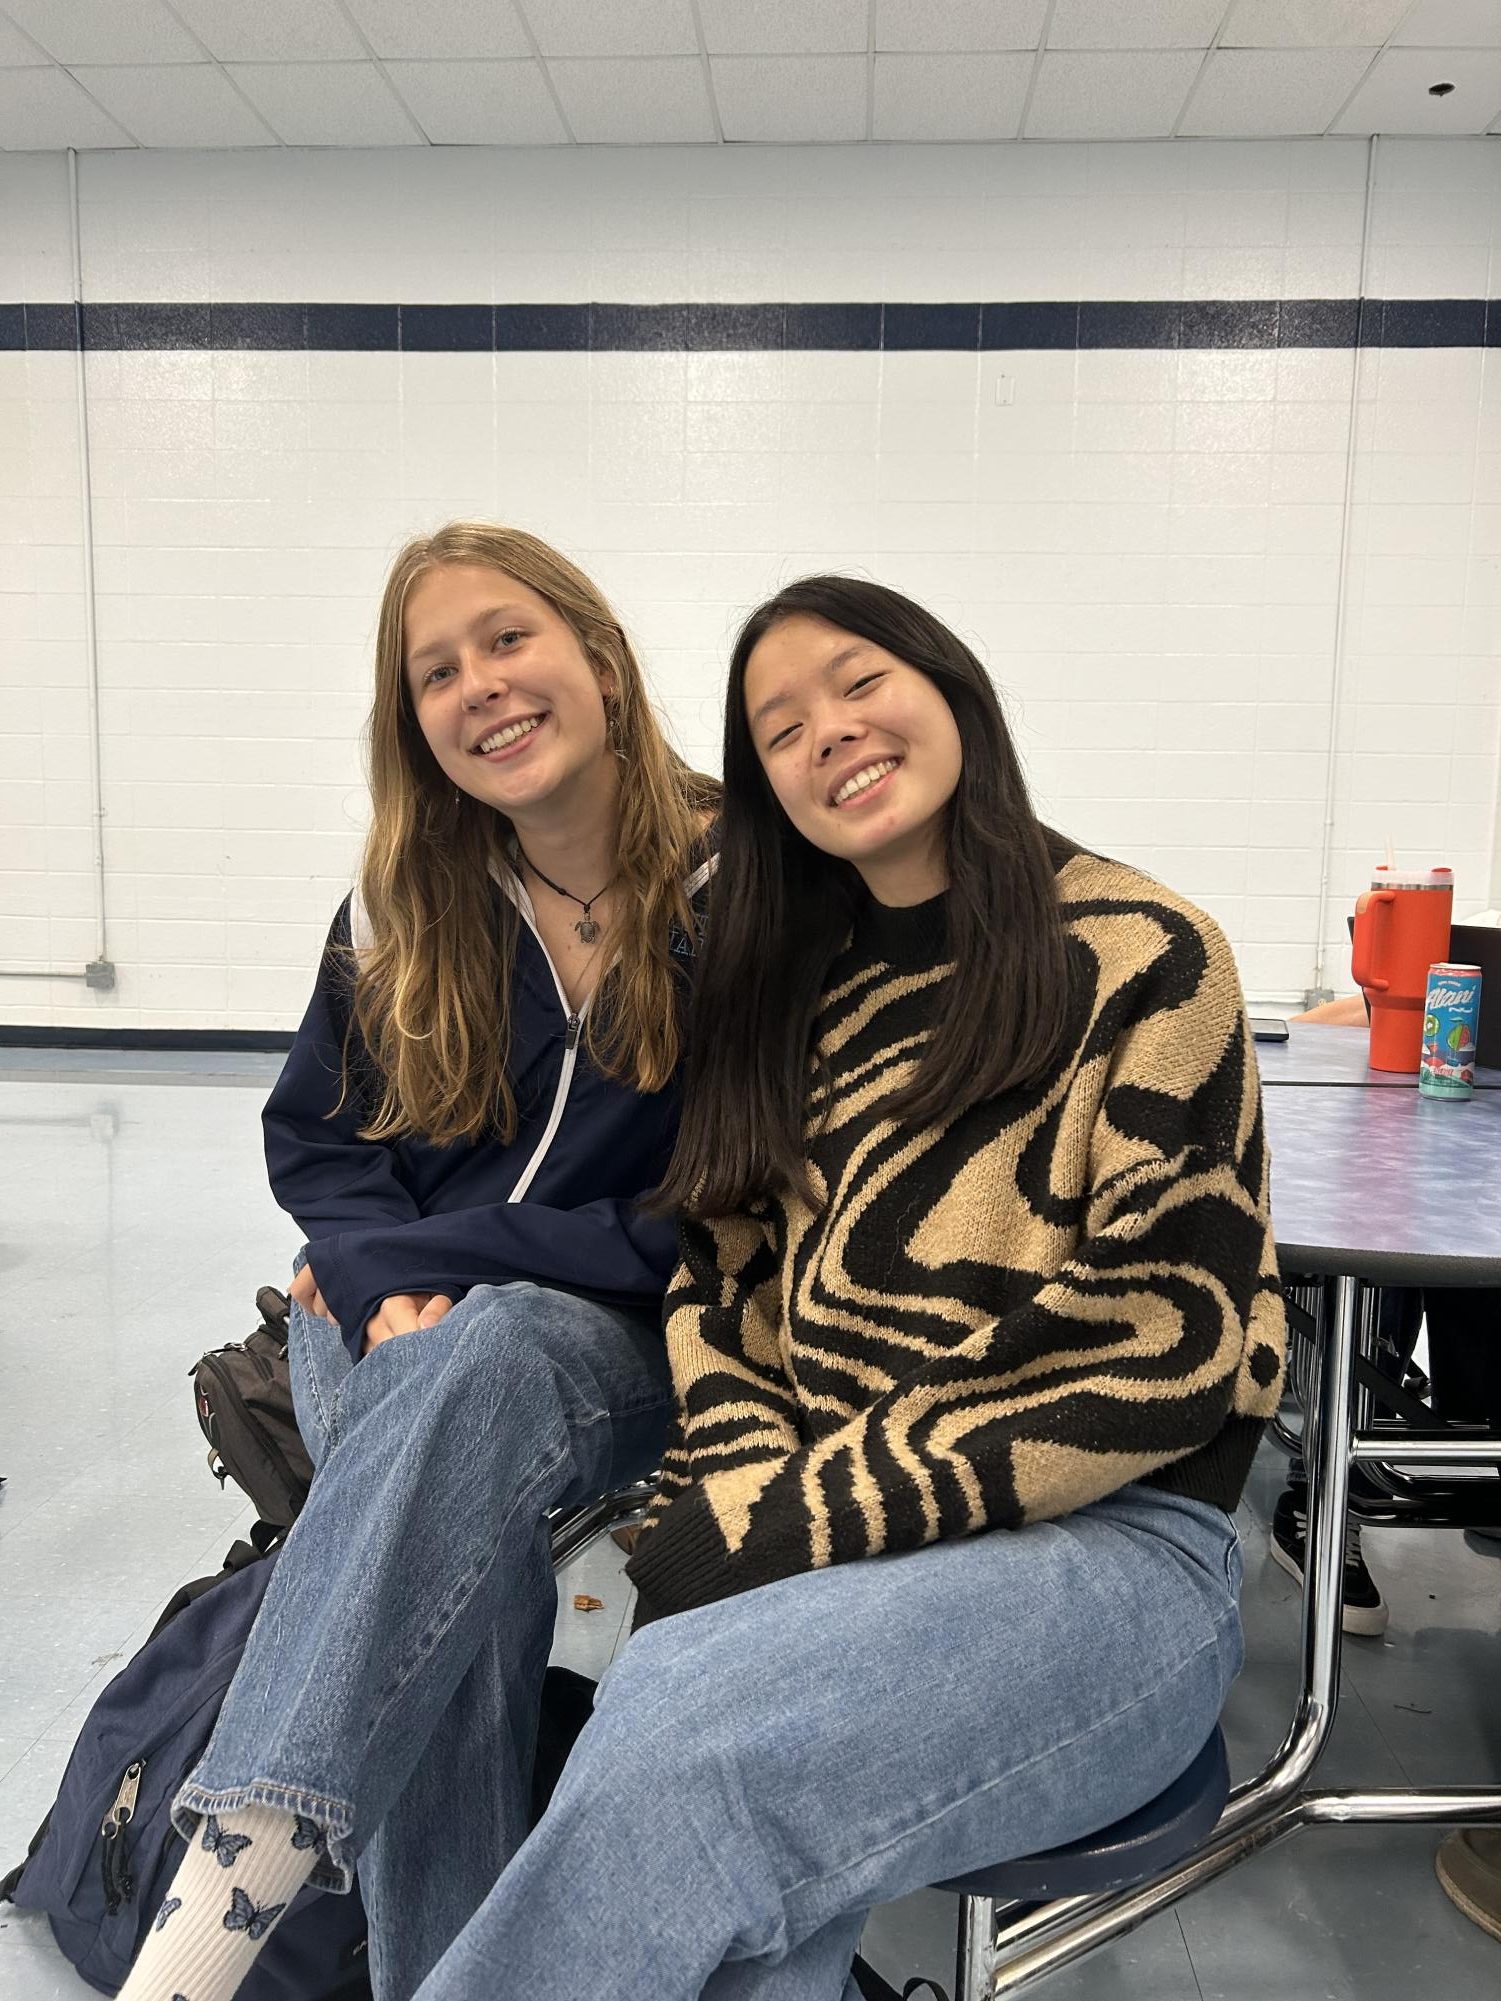 Exchange students Alice Tomasovic and Thea Vandermissen sitting together during power hour. (Sept. 26)